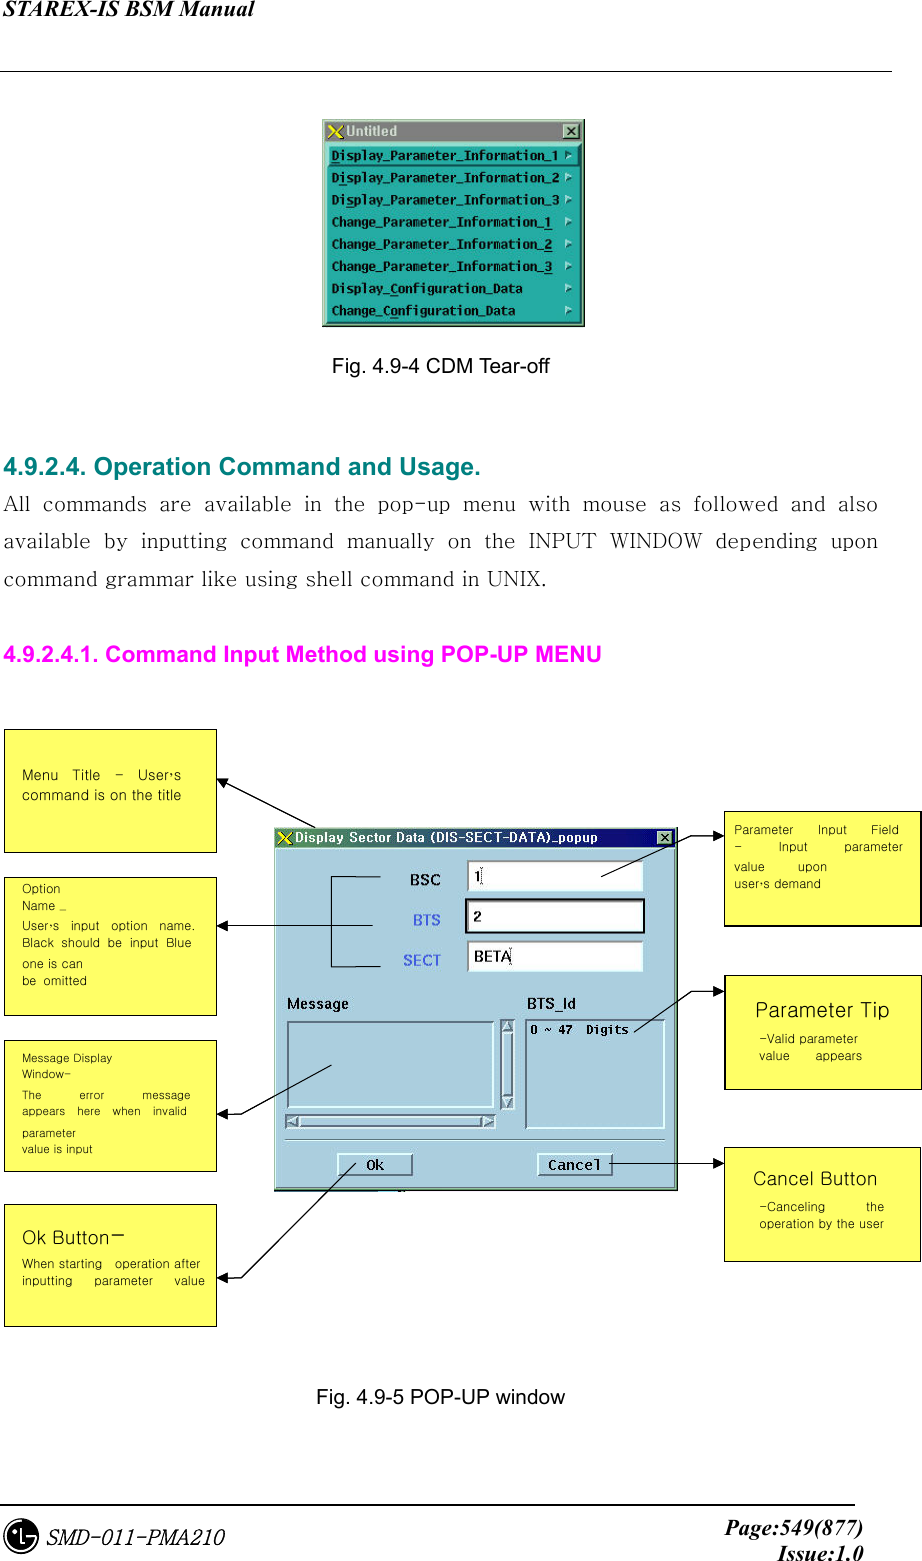 STAREX-IS BSM Manual     Page:549(877)Issue:1.0SMD-011-PMA210       Fig. 4.9-4 CDM Tear-off  4.9.2.4. Operation Command and Usage. All  commands  are  available  in  the  pop-up  menu  with  mouse  as  followed  and  also available  by  inputting  command  manually  on  the  INPUT  WINDOW  depending  upon command grammar like using shell command in UNIX.  4.9.2.4.1. Command Input Method using POP-UP MENU    Fig. 4.9-5 POP-UP window  Parameter입력필드사용자가원하는Parameter의값을입력하는창이다Parameter도움말Parameter의유효값의범위가이창에나타난다Cancel Button사용자가이작업을취소시키고자할때이버튼을누른다Option Name사용자가입력할옵션의이름으로검정색은반드시입력을받아야하며파랑색은입력을생략해도된다Message Display Window-   The  error  message appears  here  when  invalid parameter value is input Ok Button사용자가parameter입력을끝내고작업을수행하고자할때누른다메뉴타이틀사용자가내린명령어를타이틀에표시해준다Parameter  Input  Field -  Input  parameter value  upon user’s demand   Parameter Tip   -Valid parameter value  appears  Cancel Button -Canceling  the operation by the user Option Name –  User’s  input  option  name.Black  should  be  input  Blue one is can be  omitted Ok Button- When starting    operation after inputting  parameter  value  Menu Title - User’s command is on the title 